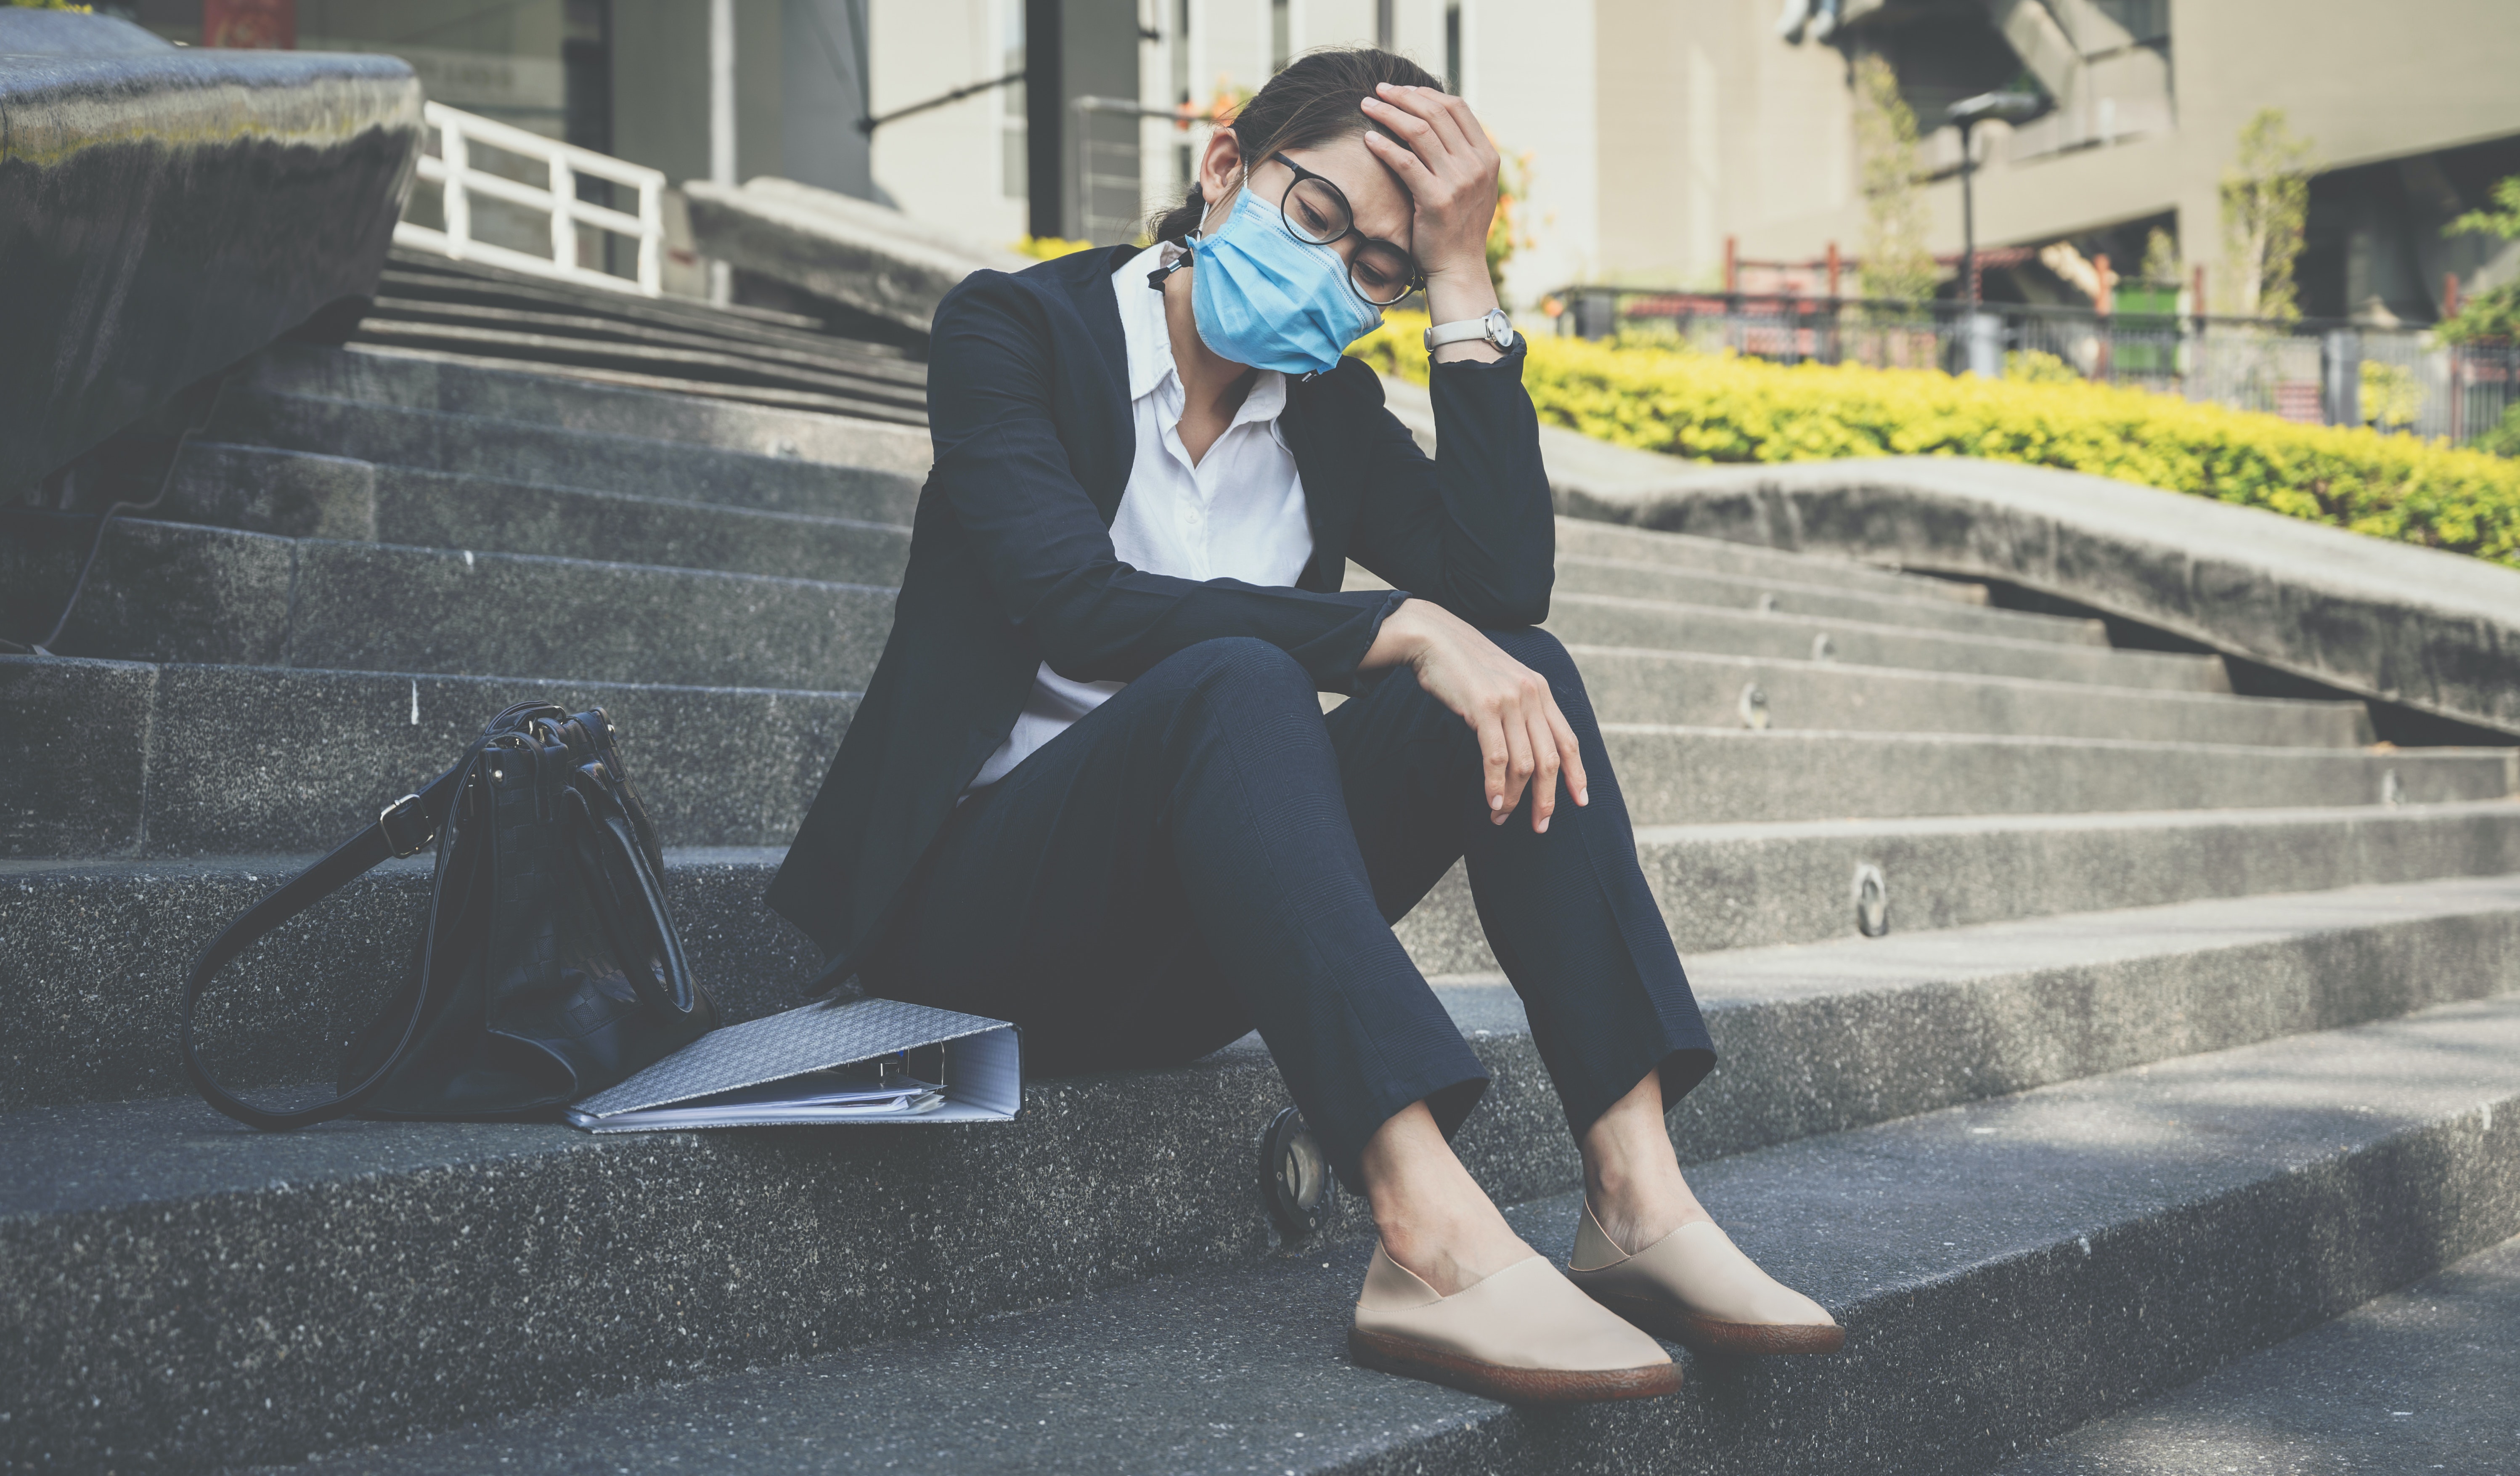 Woman wearing a surgical mask sits on the steps of an office building, resting her elbow on a bent knee holding her forehead, with her purse and work binder beside her.